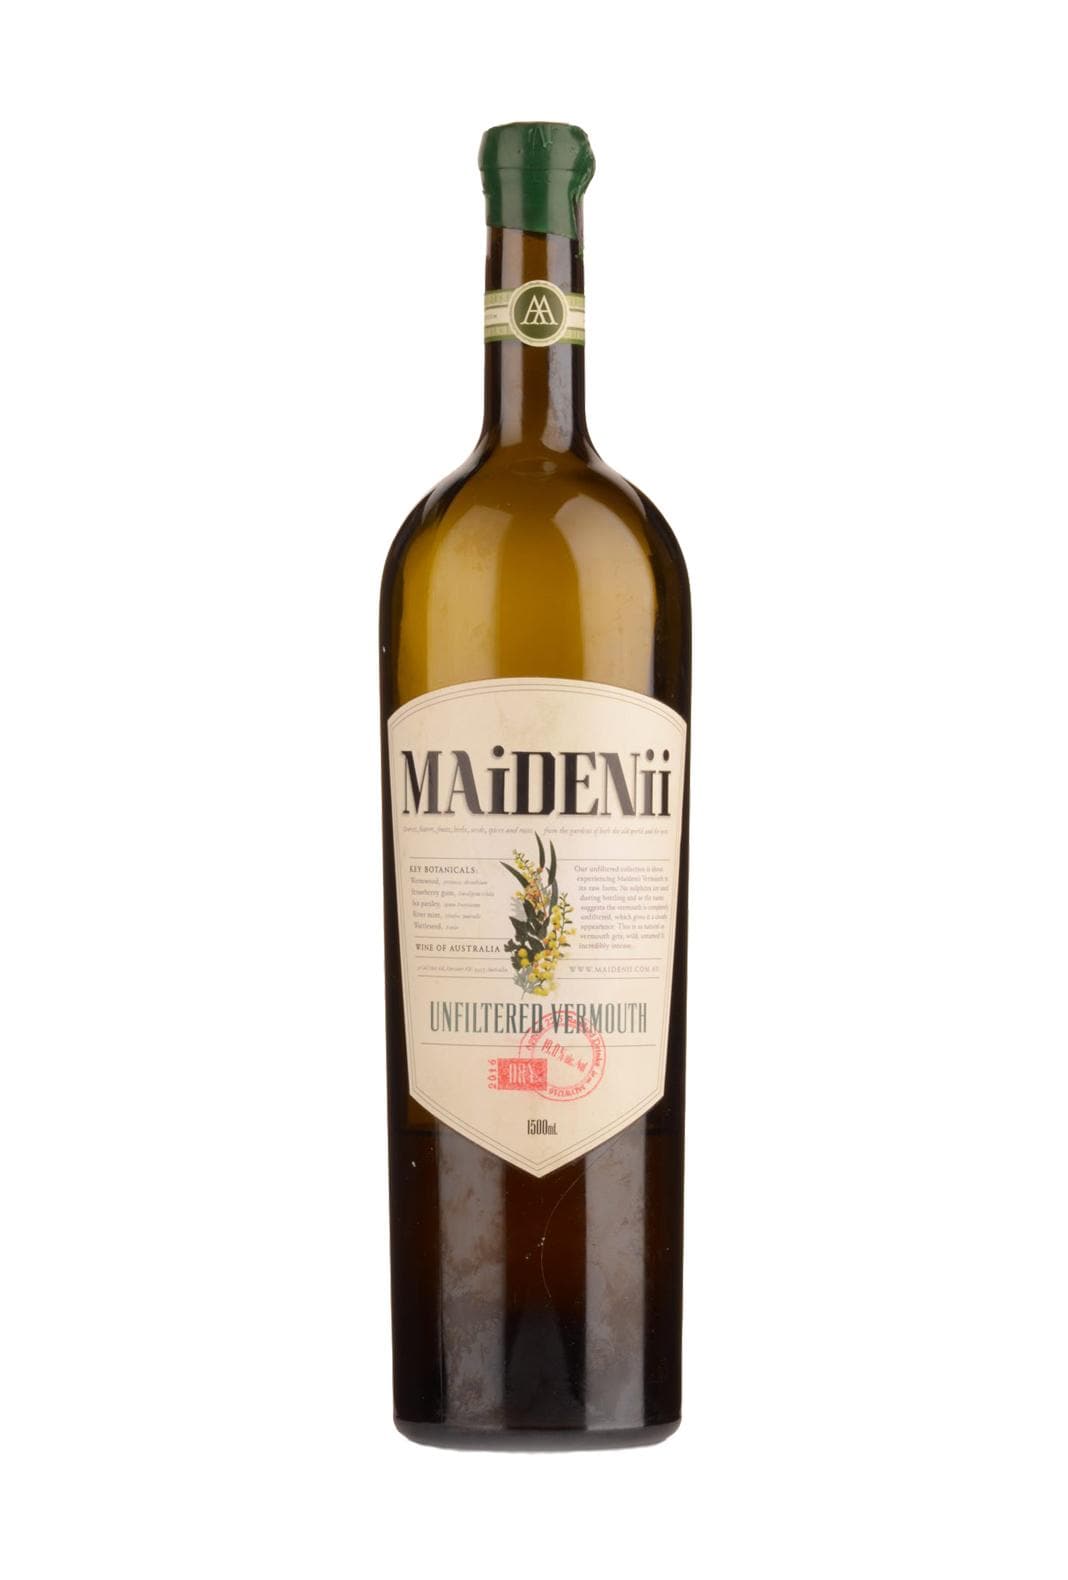 Maidenii Classic Vermouth 2017 Unfiltered 17.5% 1500ml | Liquor & Spirits | Shop online at Spirits of France